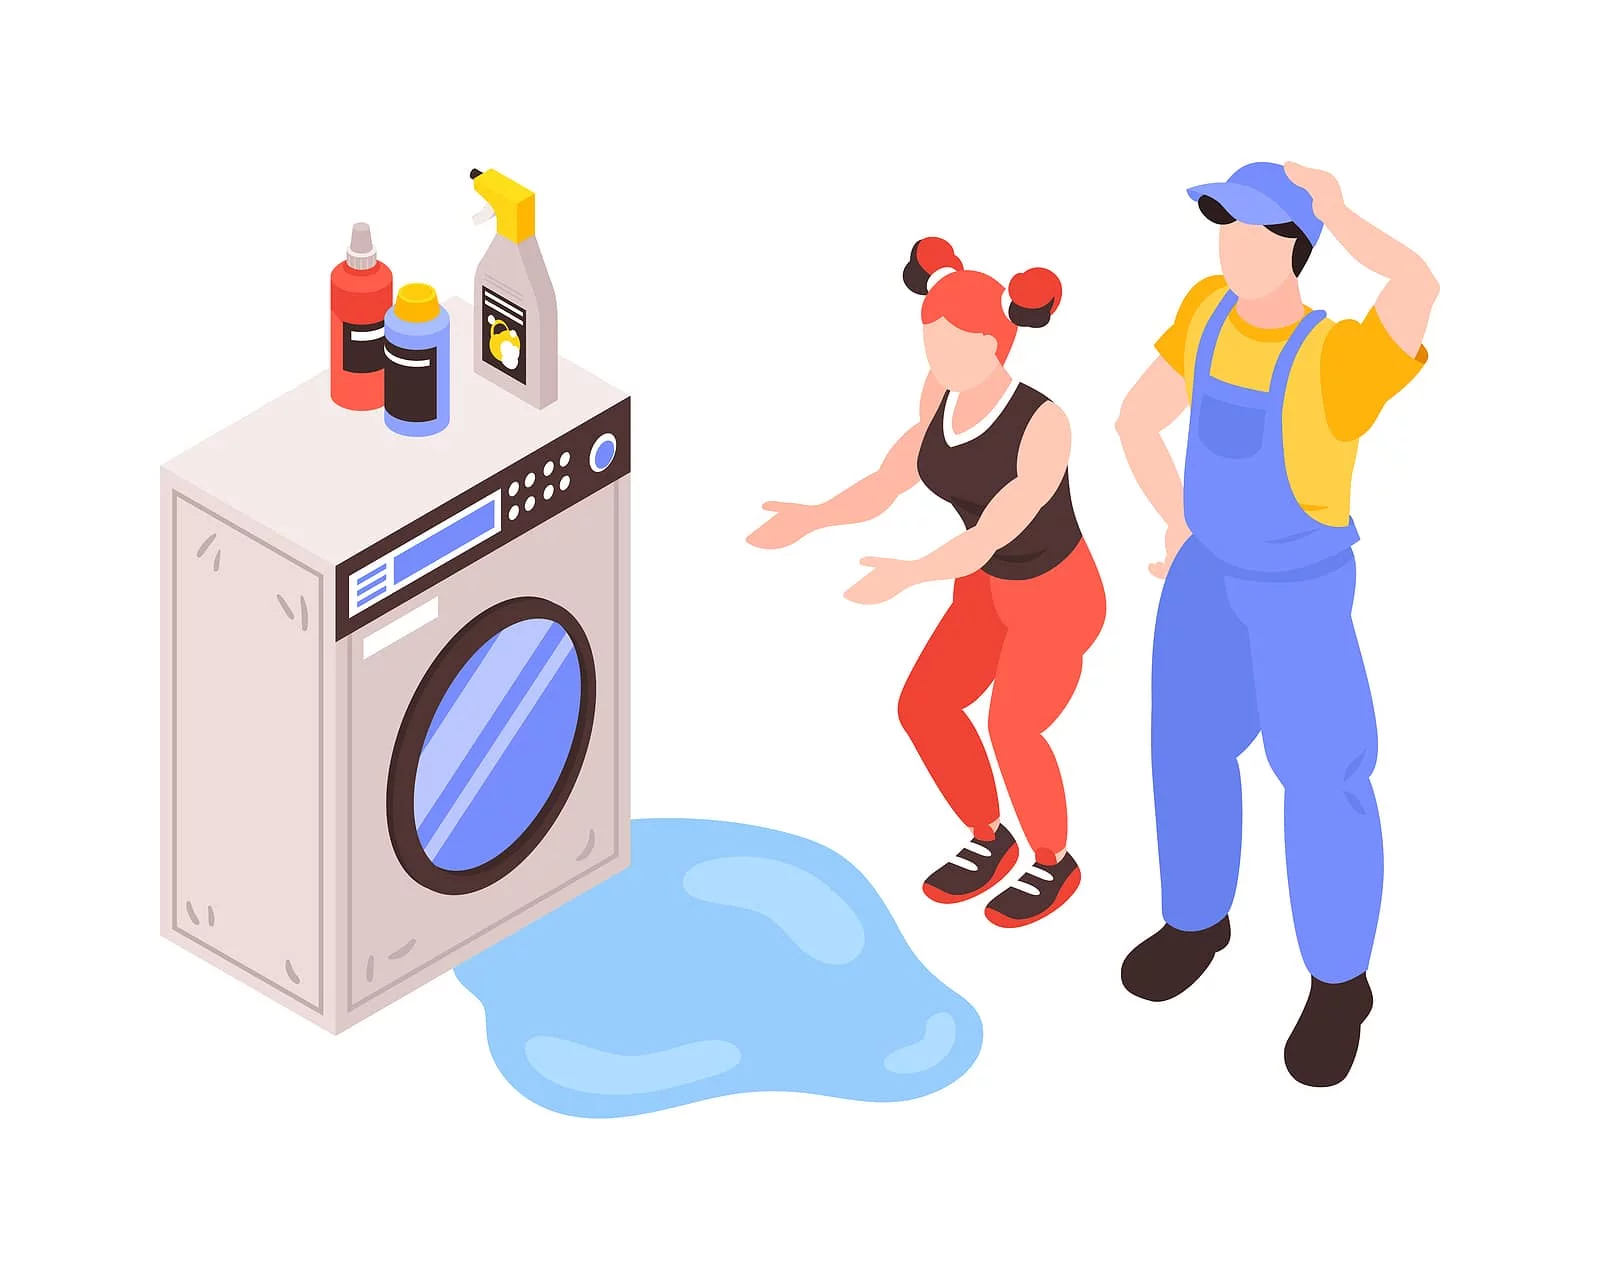 does renters insurance cover water damage from washing machine